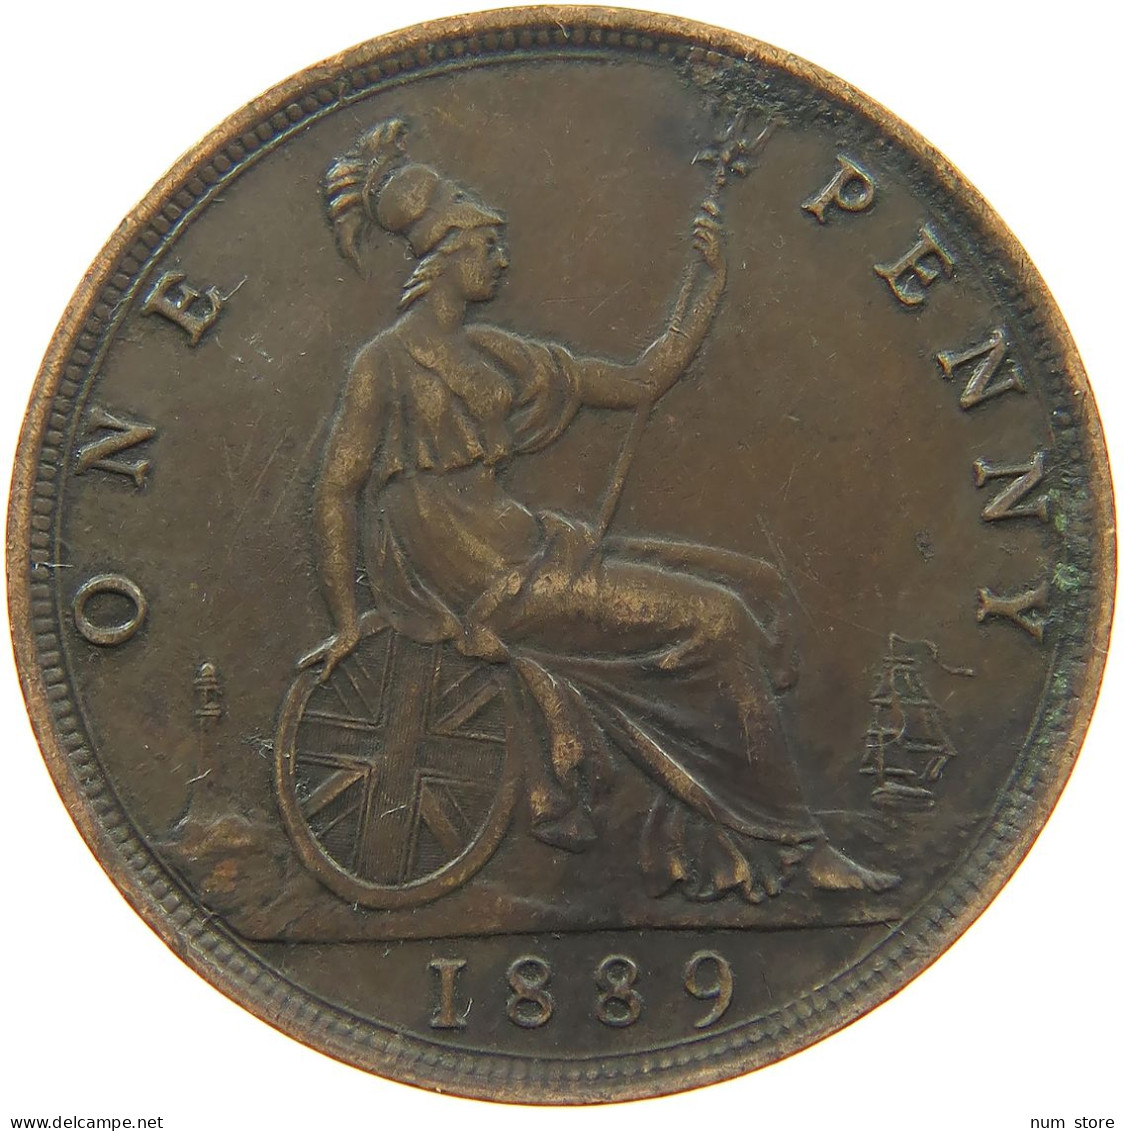 GREAT BRITAIN PENNY 1889 Victoria 1837-1901 #s076 0589 - D. 1 Penny